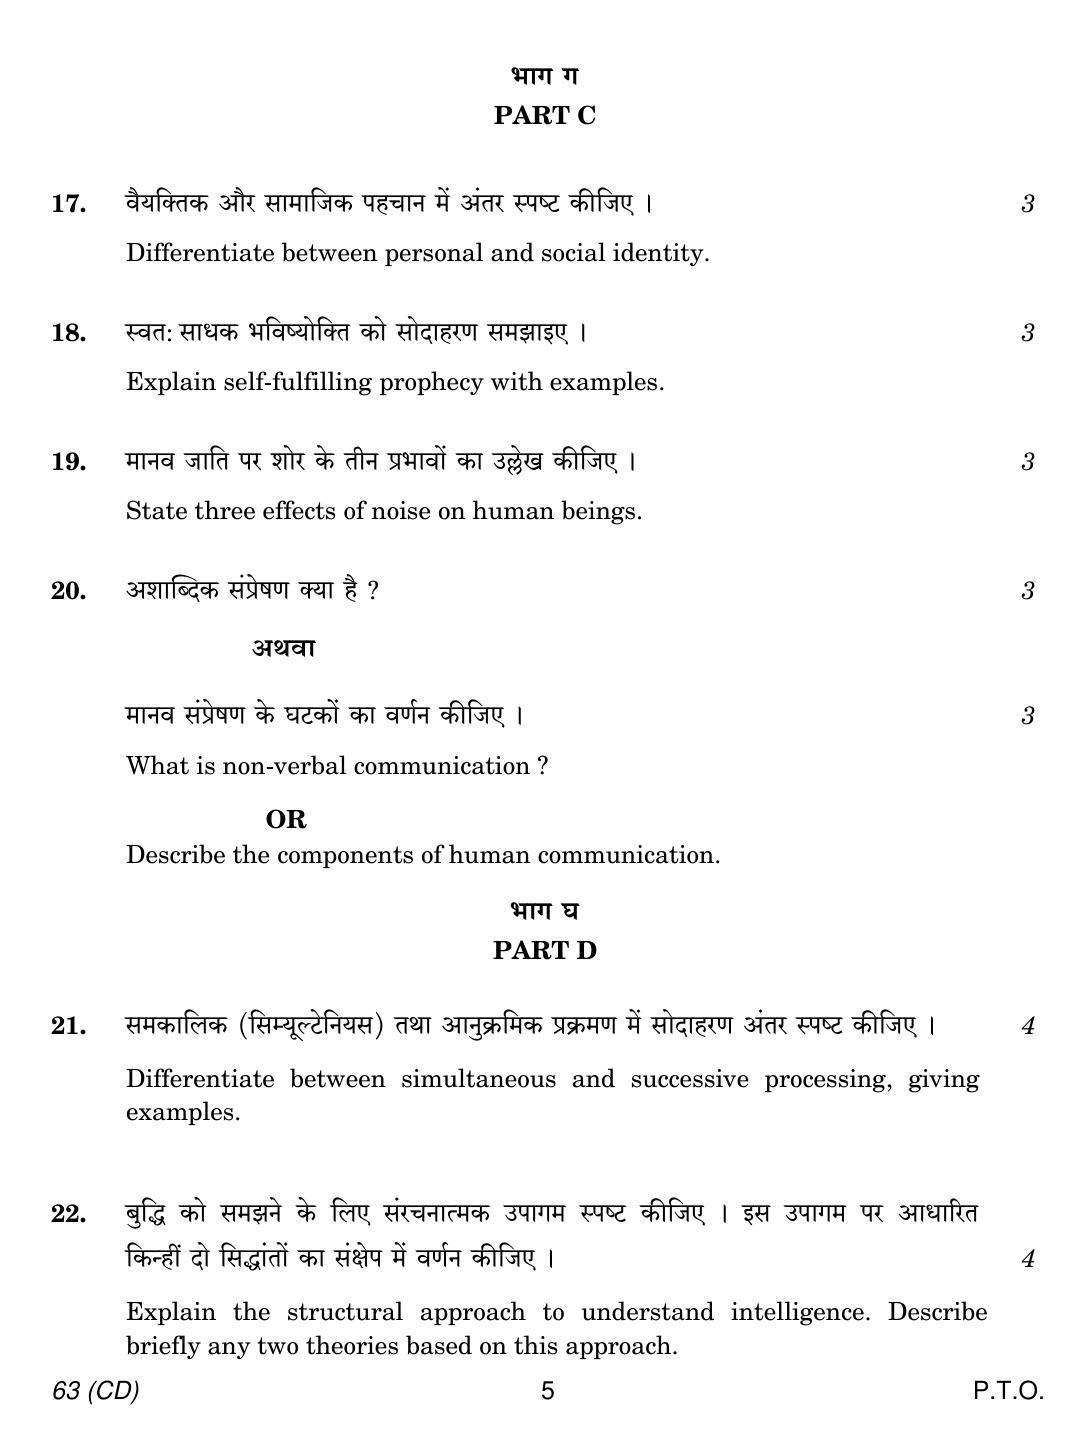 CBSE Class 12 63 PSYCHOLOGY CD 2018 Question Paper - Page 5